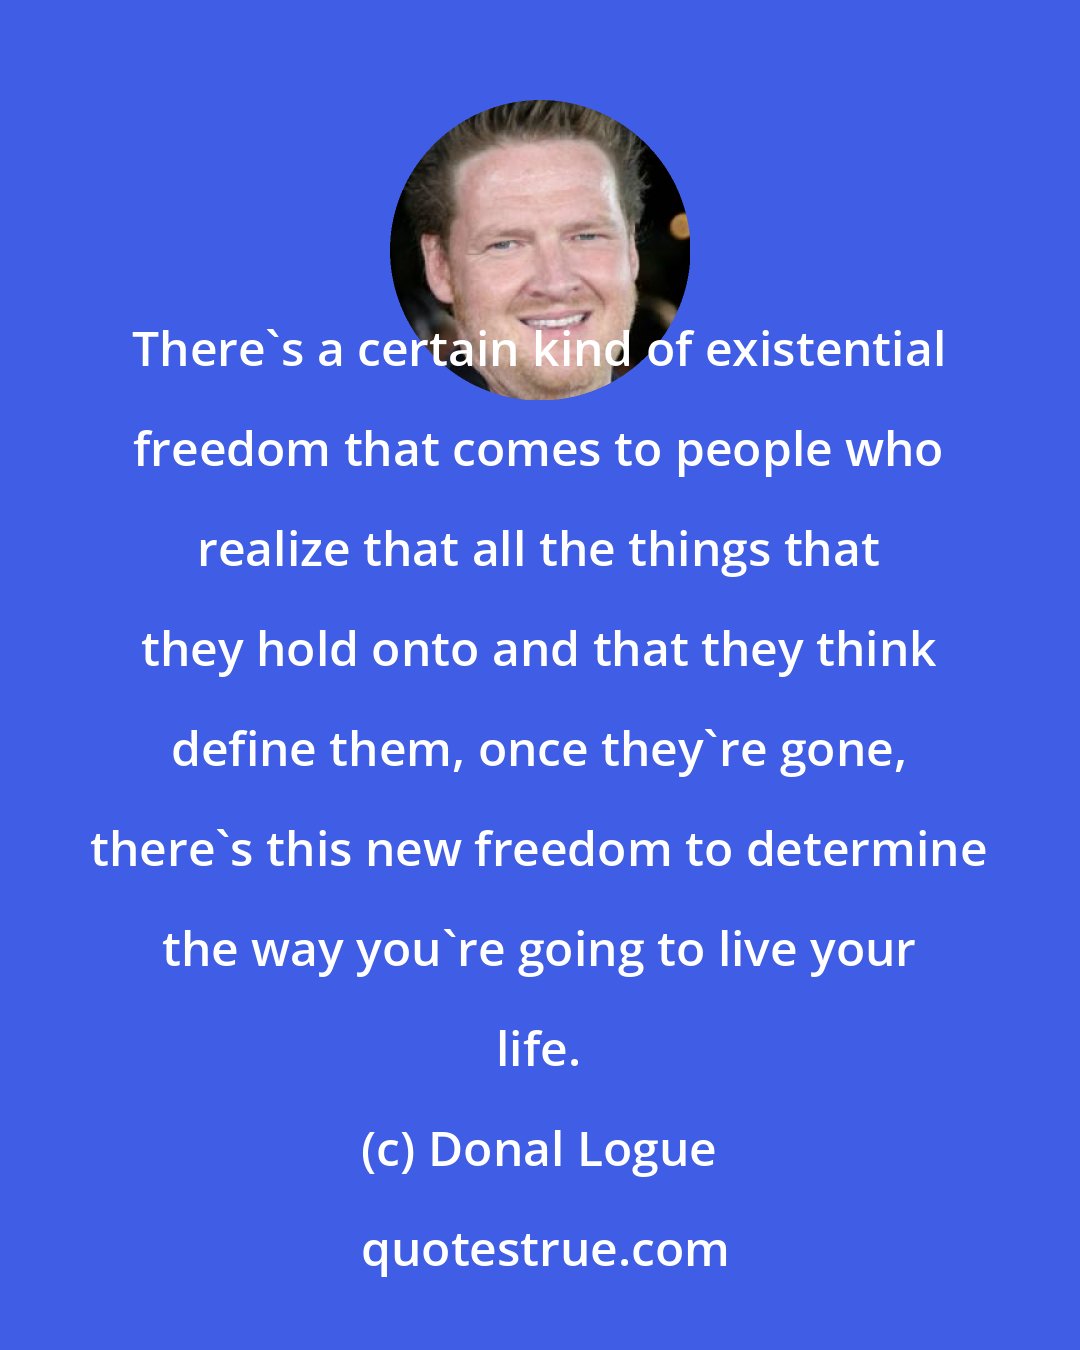 Donal Logue: There's a certain kind of existential freedom that comes to people who realize that all the things that they hold onto and that they think define them, once they're gone, there's this new freedom to determine the way you're going to live your life.